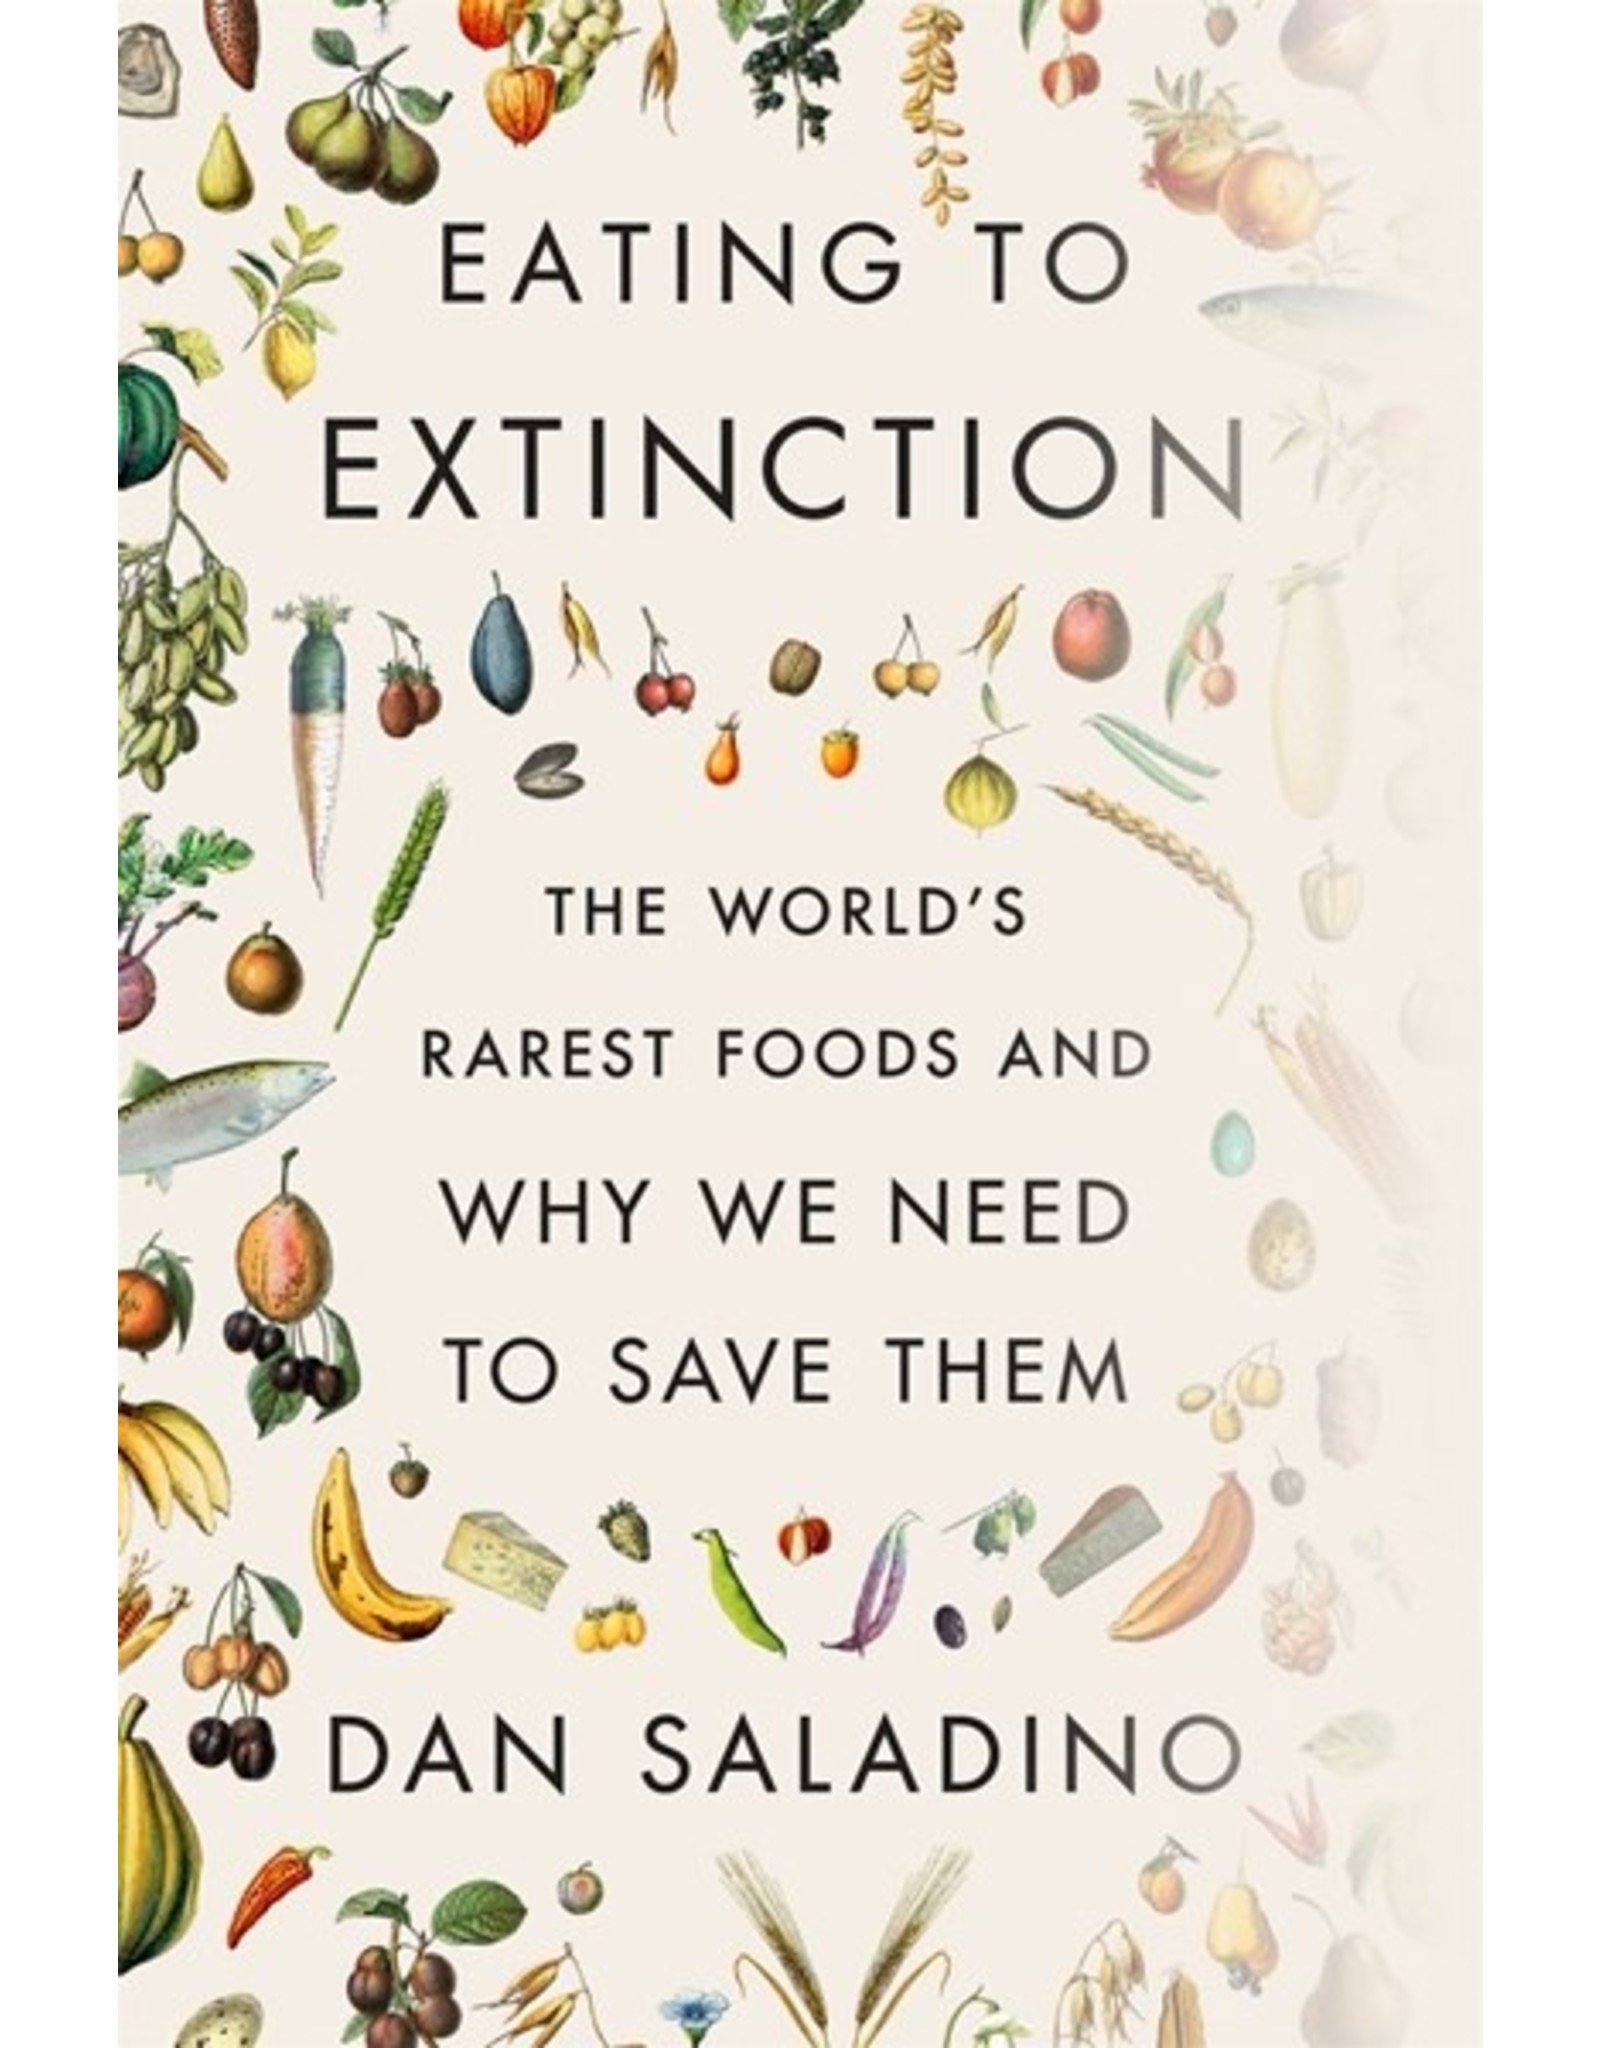 books-eating-to-extinction-the-worlds-rarest-foods.jpg